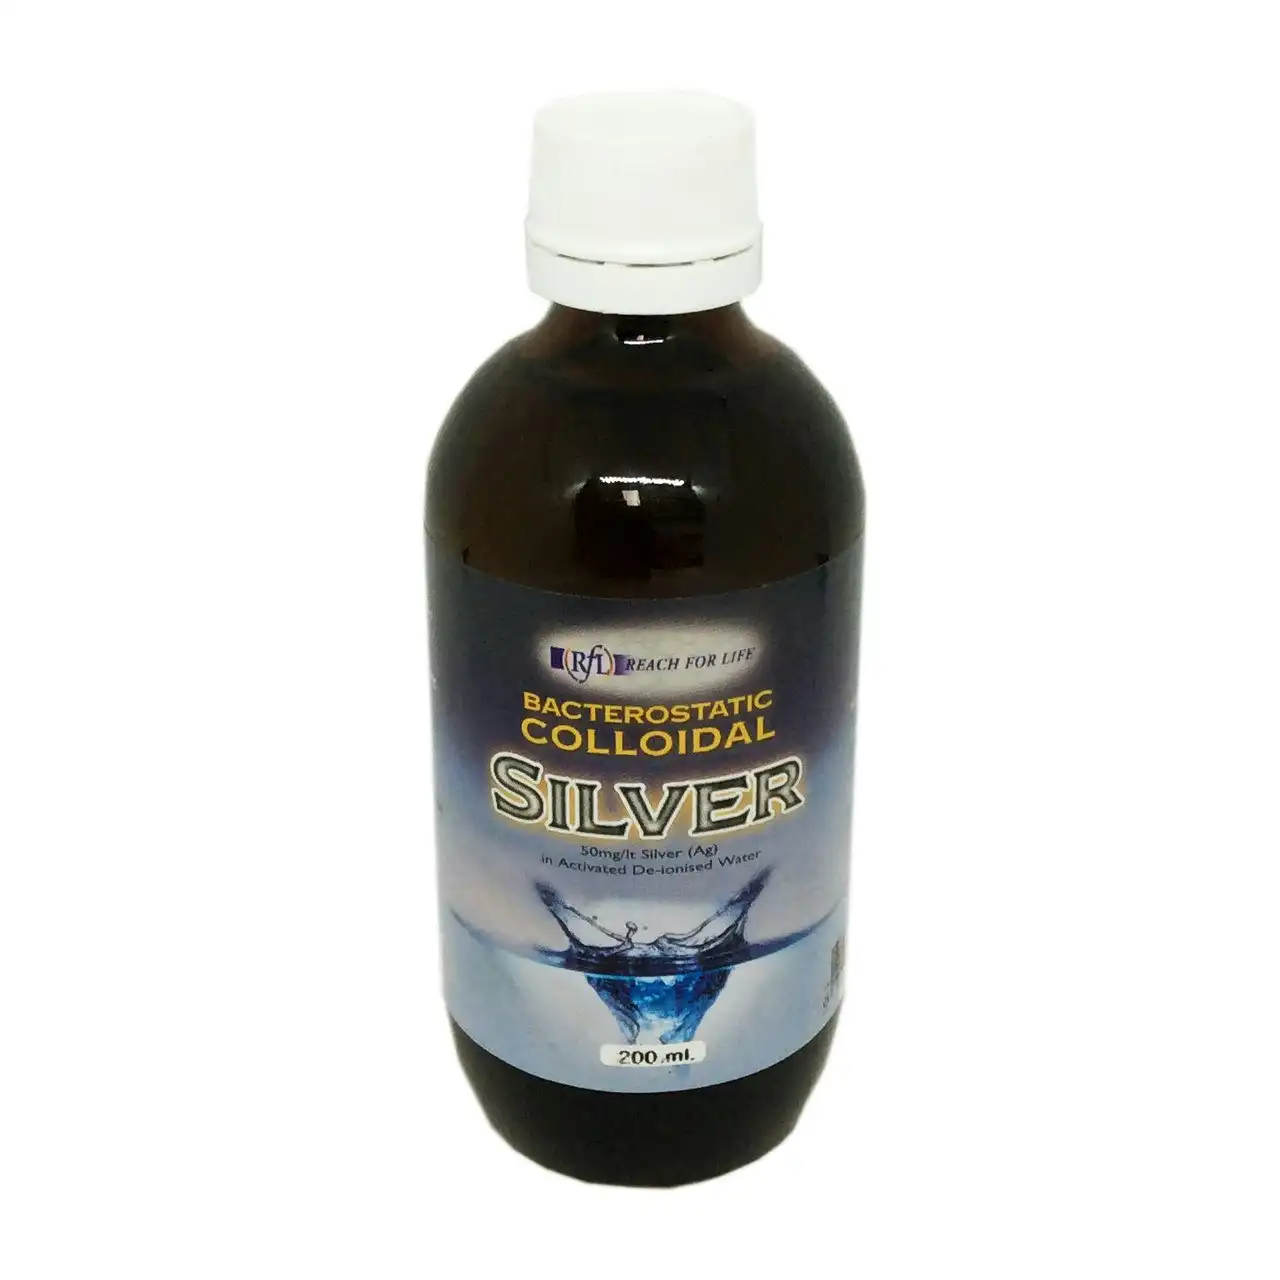 Reach For Life Bacterostatic Colloidal Silver 200ml